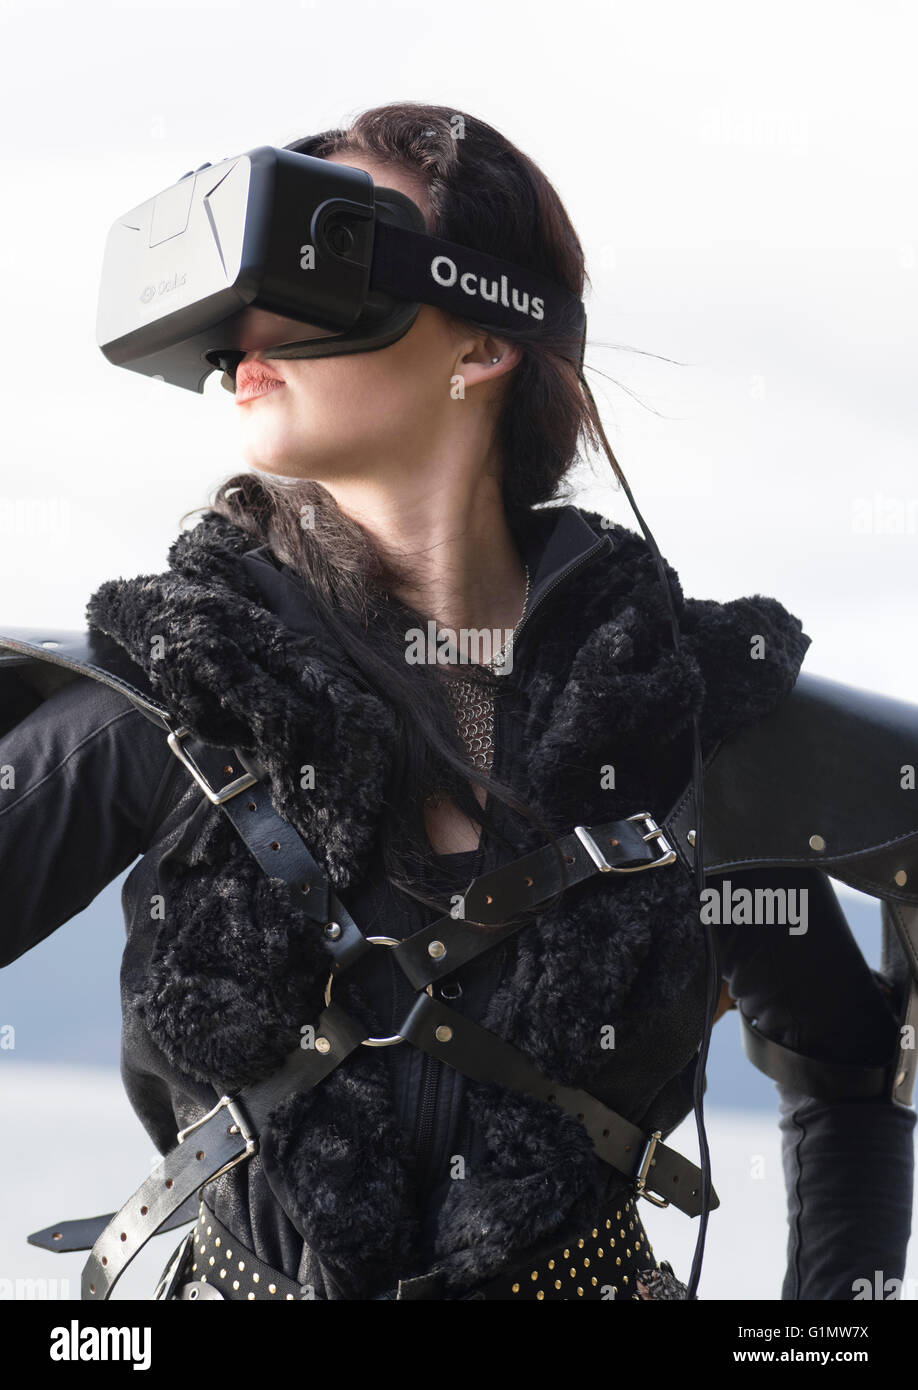 Conceptual picture of a young woman wearing costume and Oculus Rift Virtual Reality headset Stock Photo